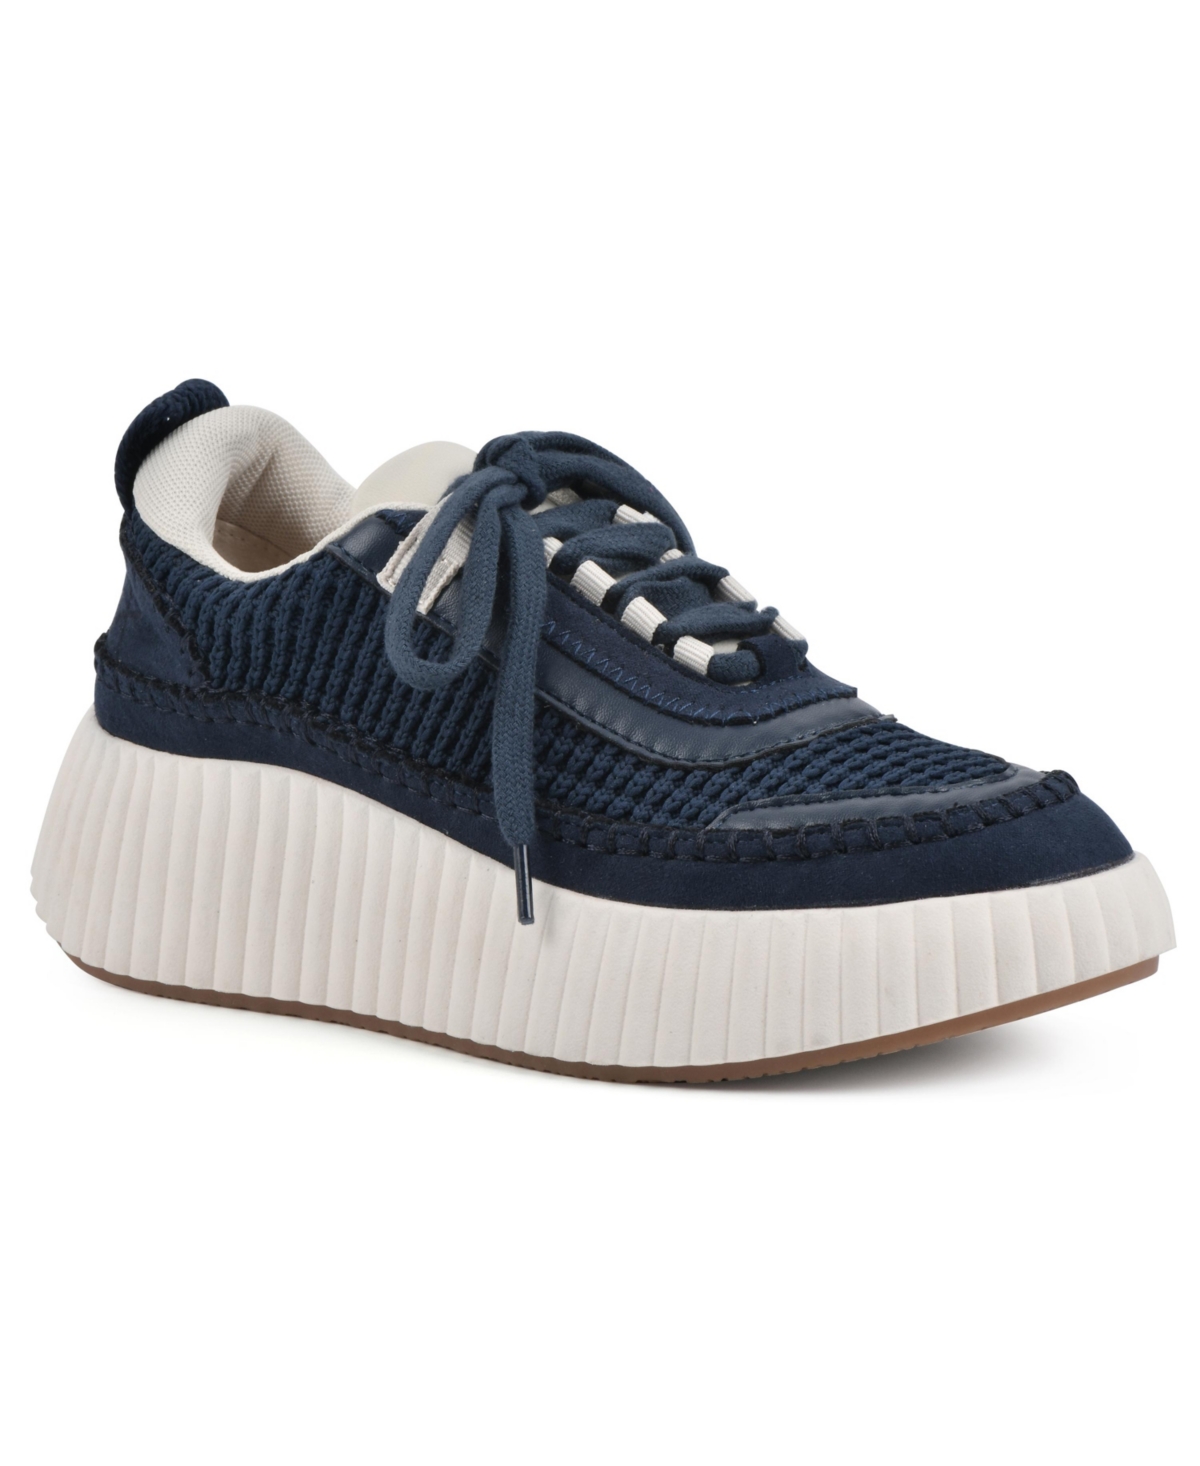 Women's Dynastic Lace Up Platform Sneakers - Navy, Fabric